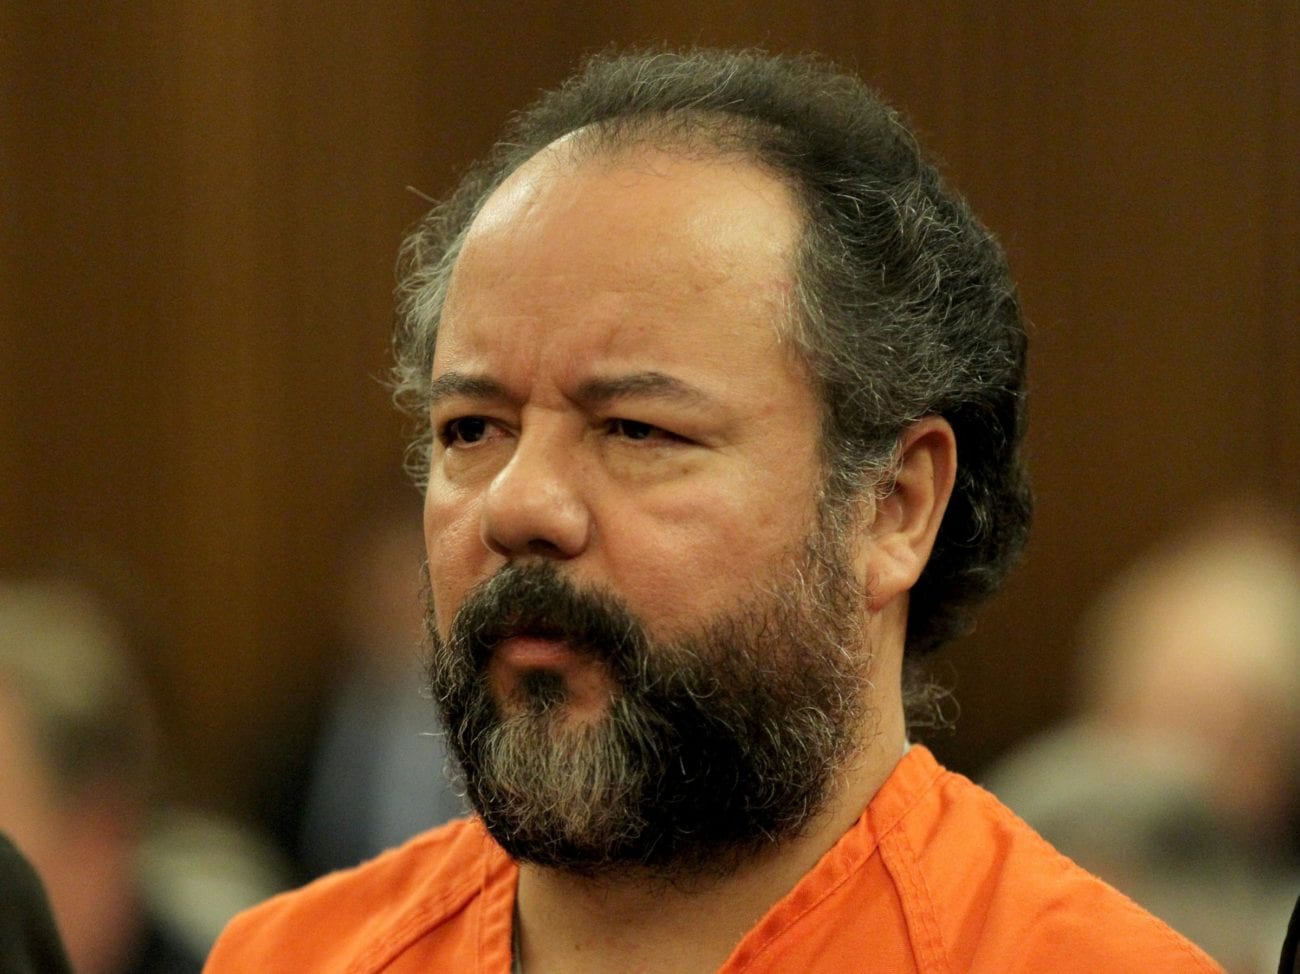 Ariel Castro's victims never imagined a baby girl would lead to their eventual escape in 2013, after over a decade in captivity being tortured & raped.